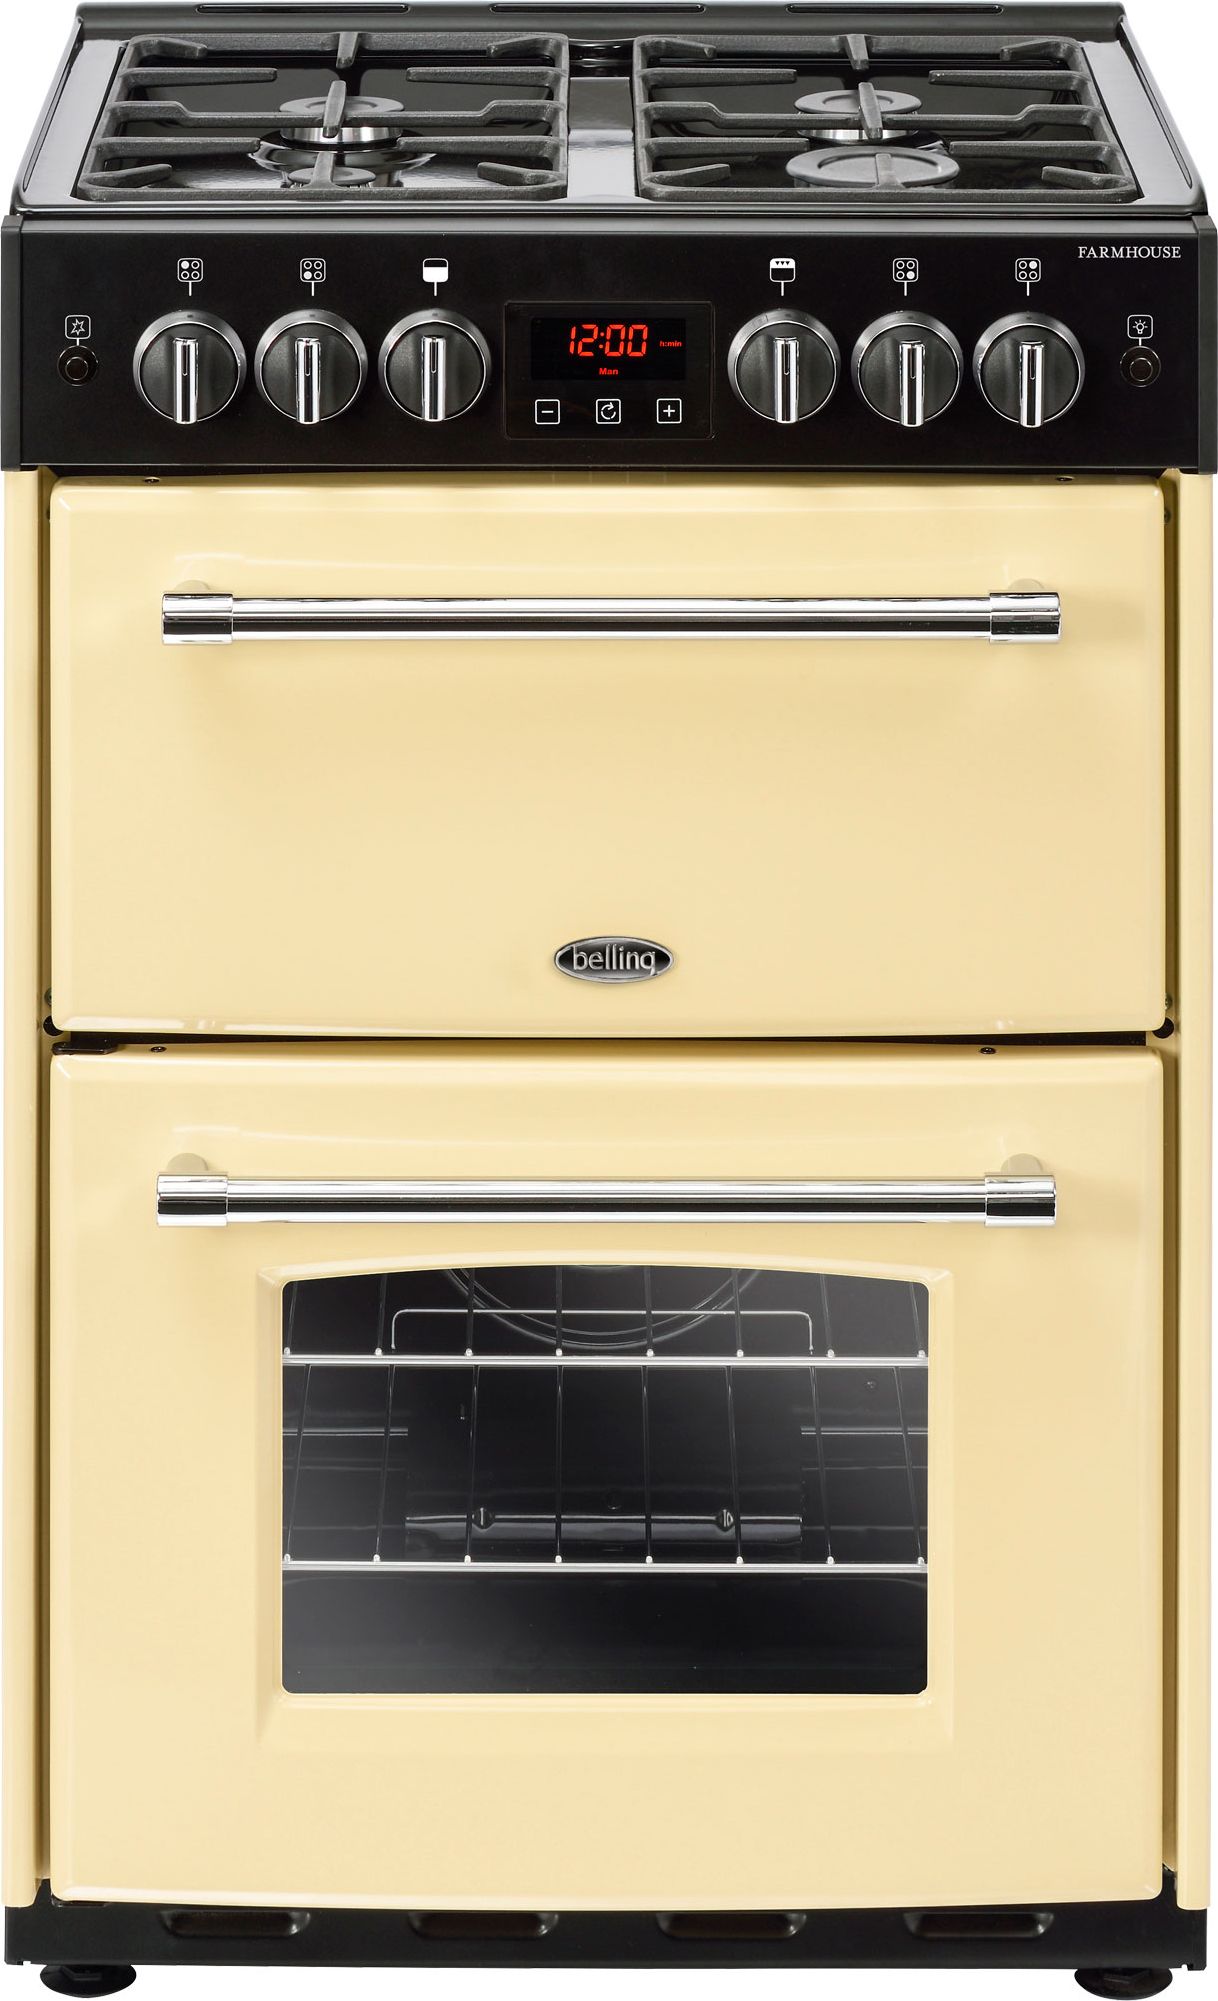 Belling Farmhouse60G 60cm Freestanding Gas Cooker with Full Width Electric Grill - Cream - A+/A Rated, Cream